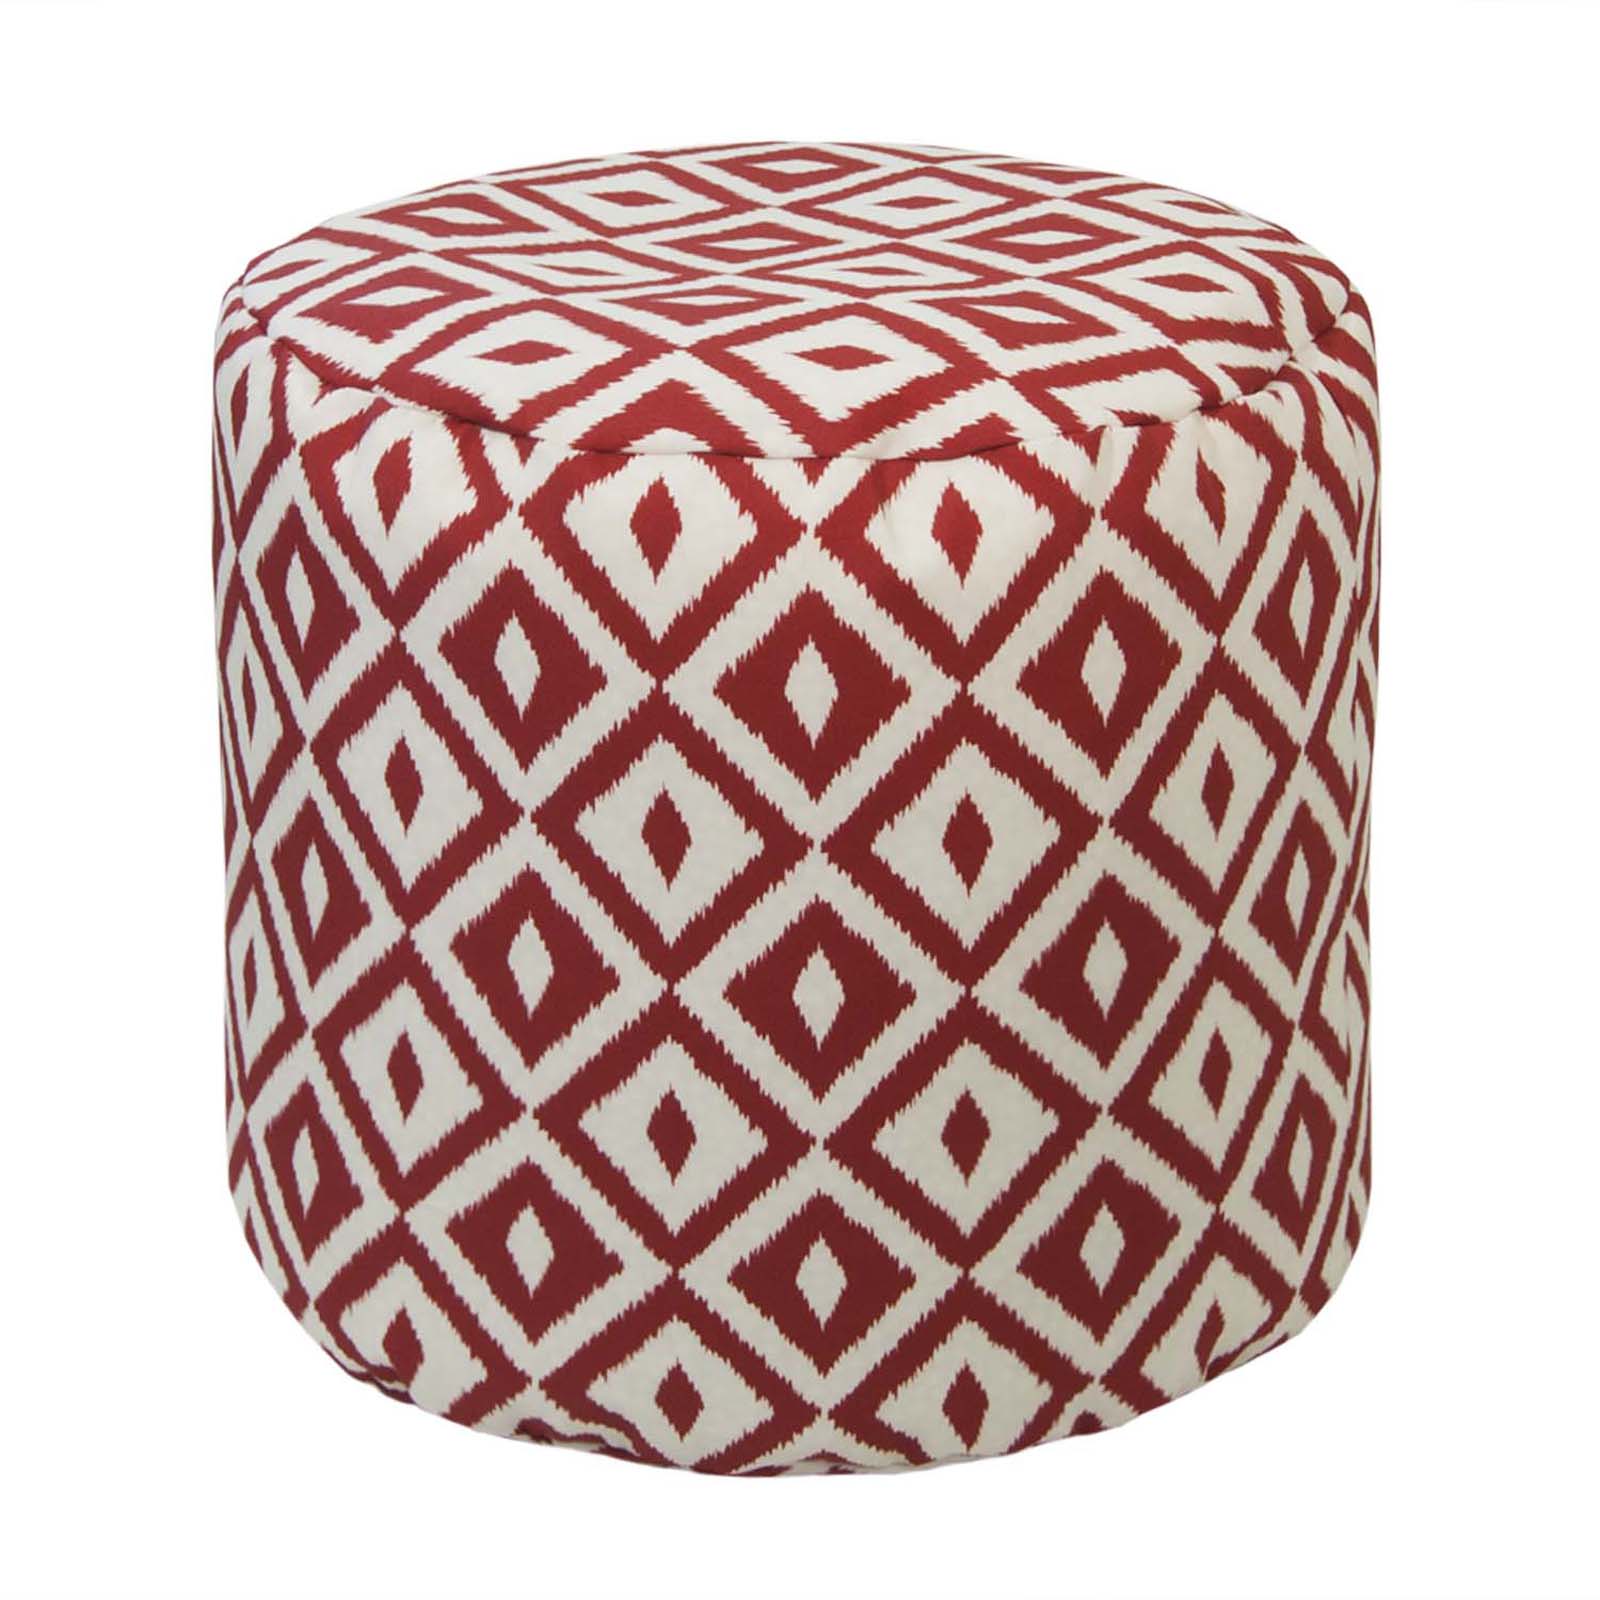 Gold Medal Outdoor/Indoor Weather Resistant Ottoman - Assorted Colors & Patterns